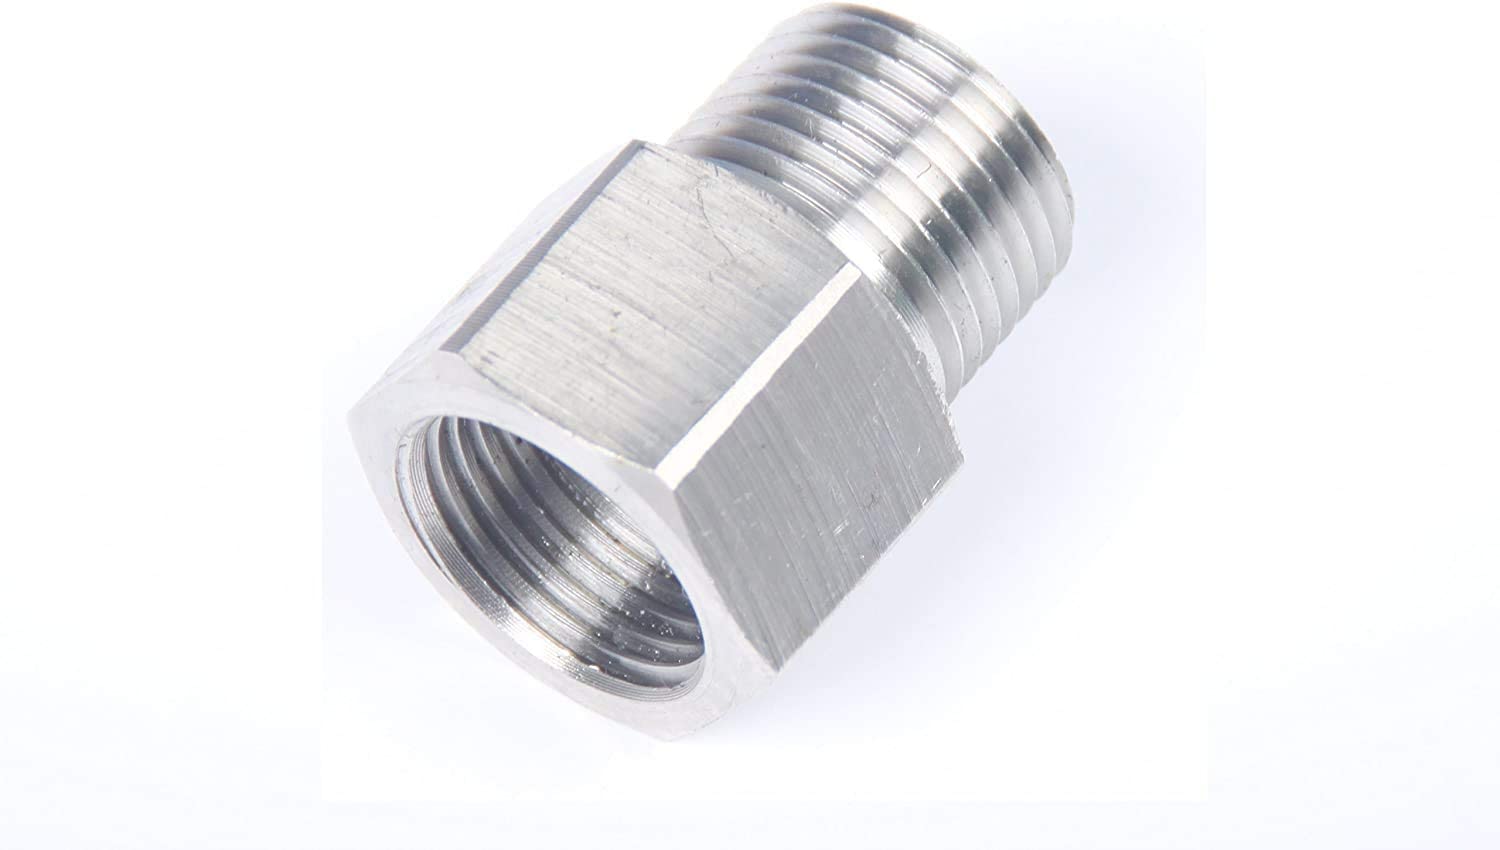 LTWFITTING Bar Production Stainless Steel 316 Pipe Fitting 1/2 Inch Female x 1/2 Inch Male NPT Adapter Air Fuel Water (Pack of 25)